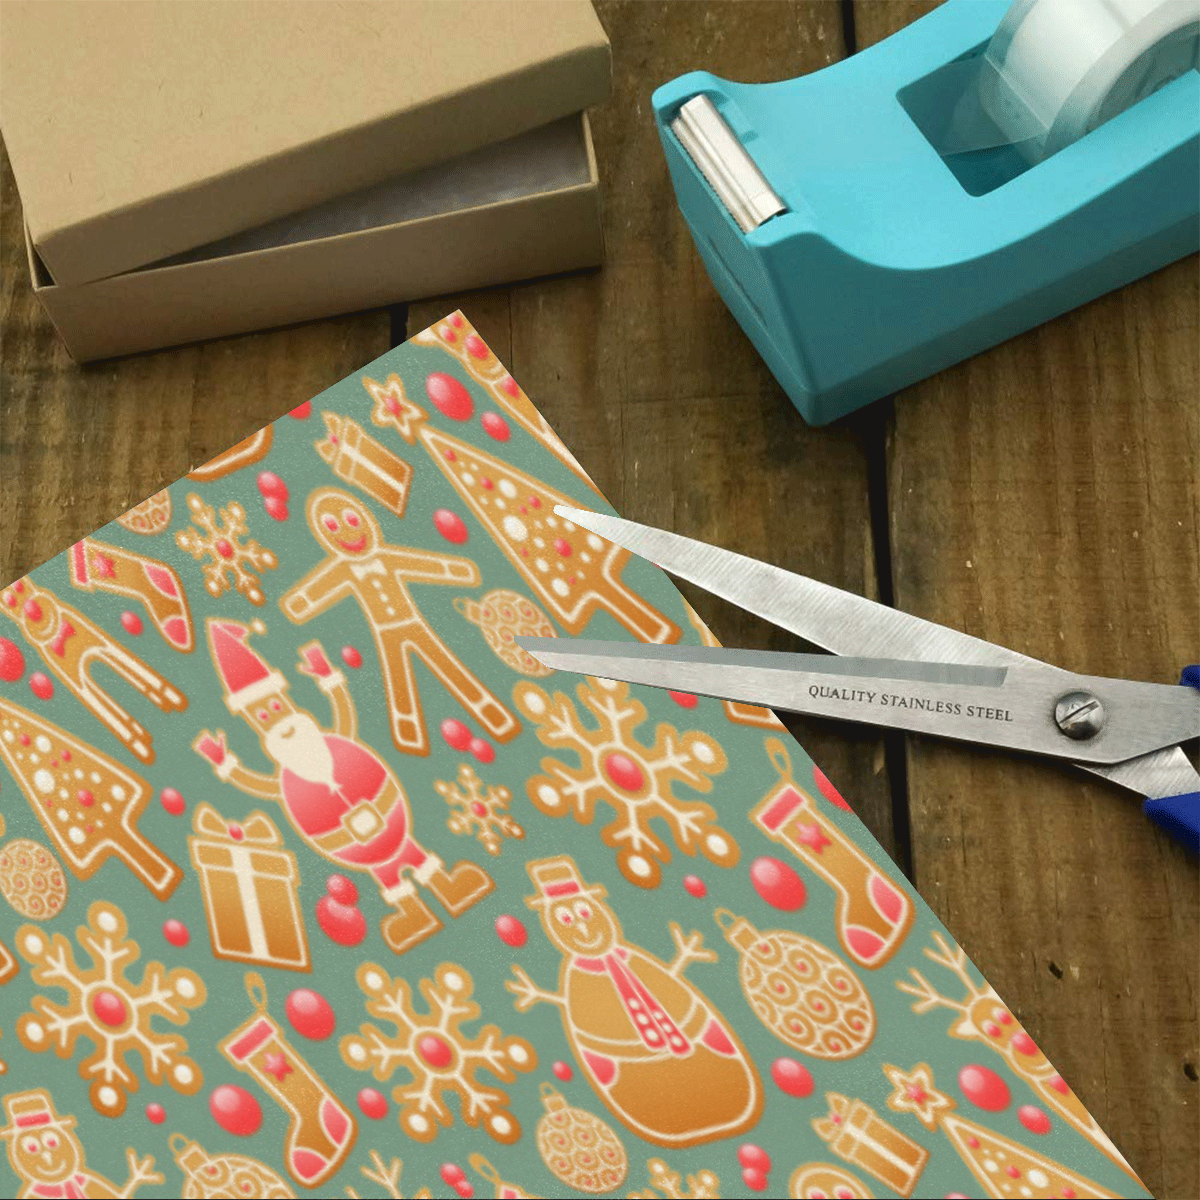 Christmas Gingerbread Icons Pattern Gift Wrapping Paper 58"x 23" (2 Rolls)